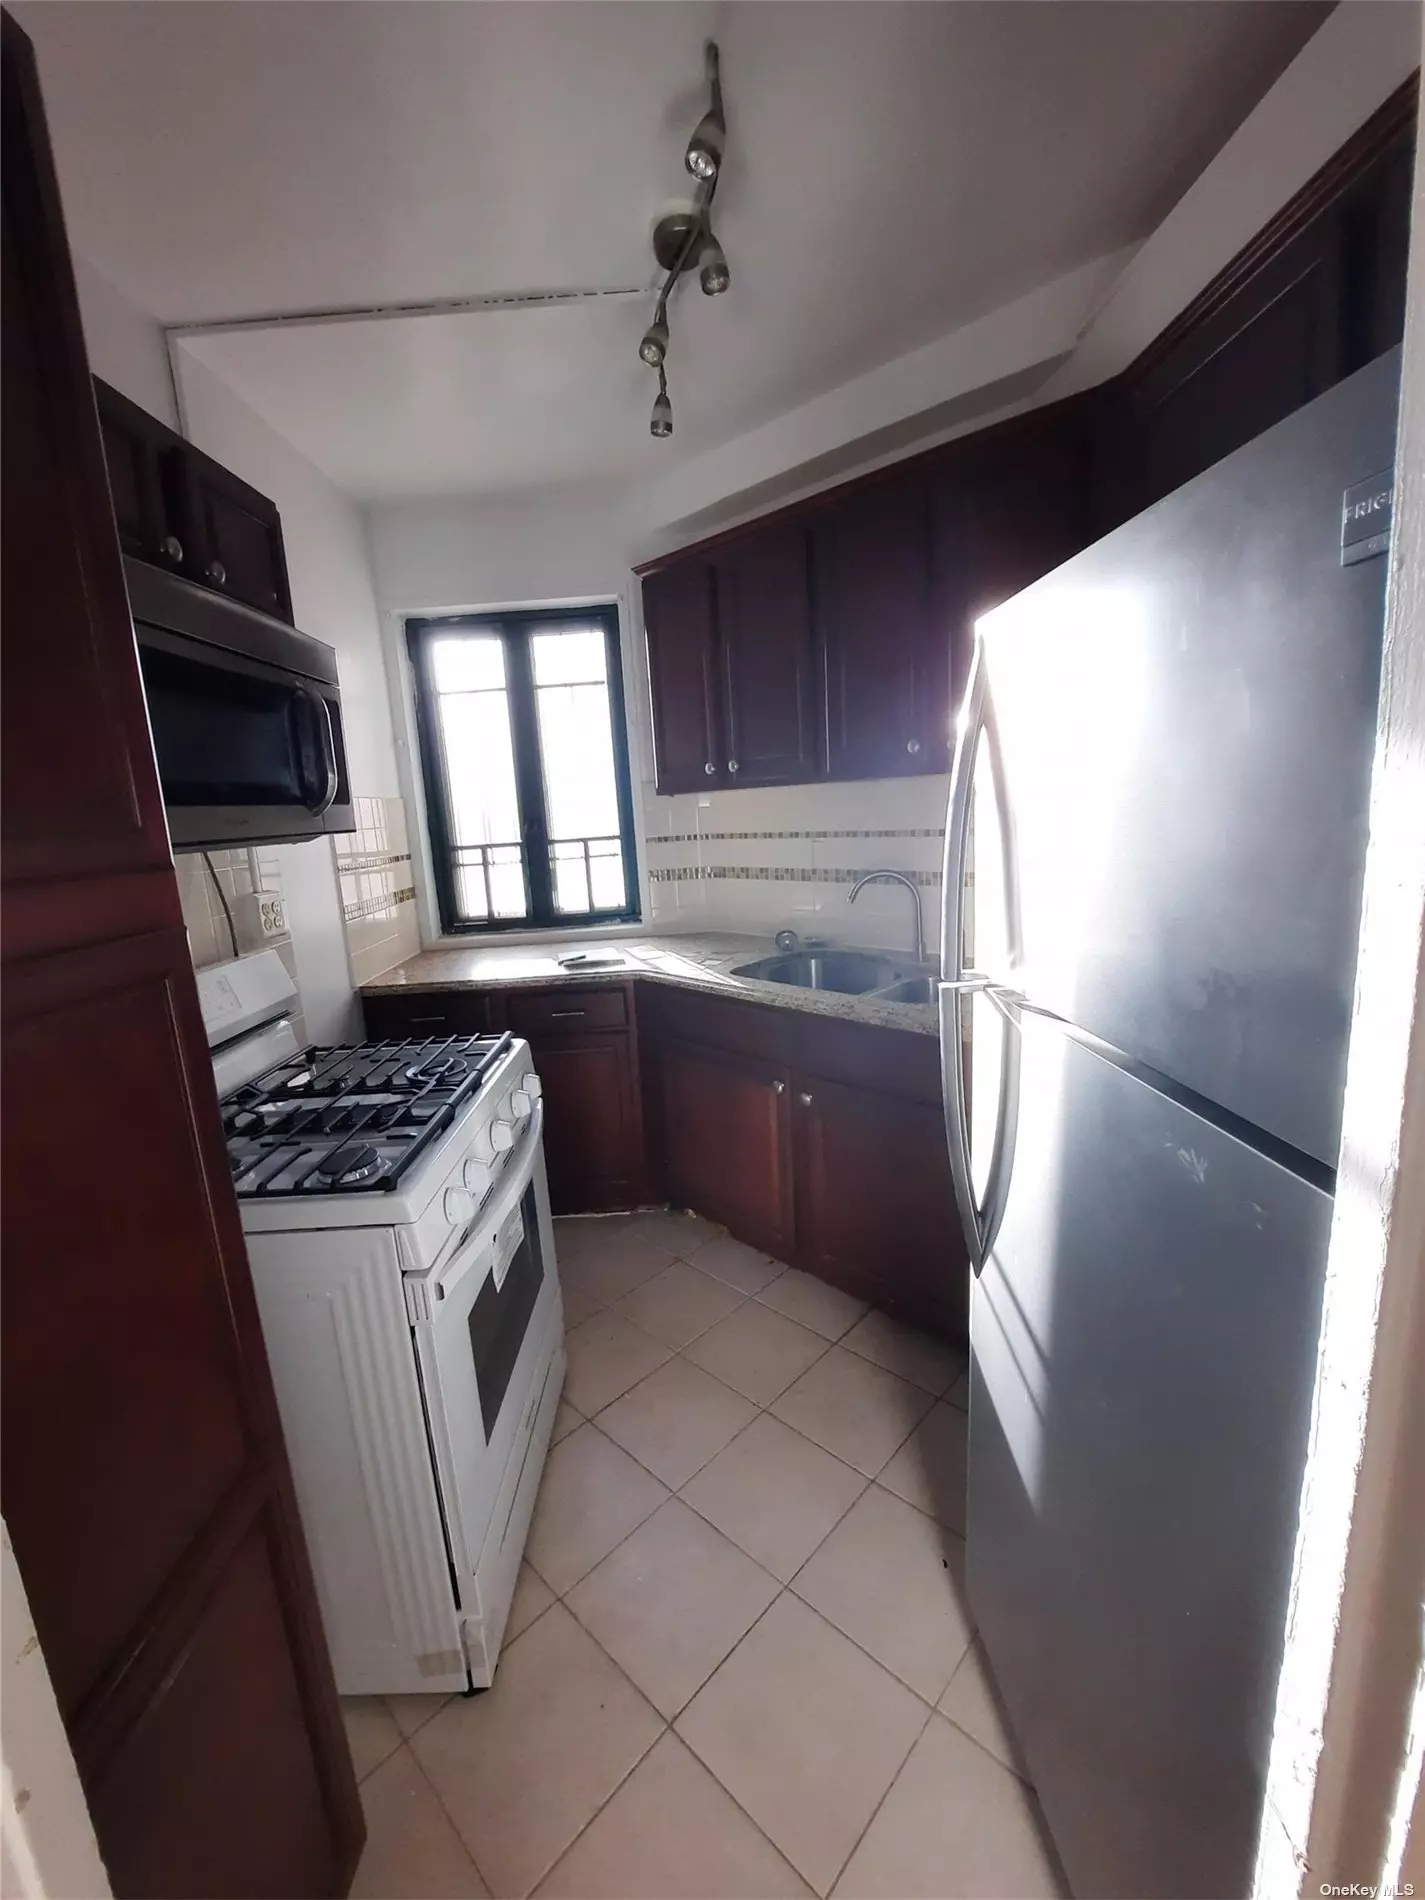 Spacious apartment with roomy bedrooms, closets,  Kitchen and full bathroom ,  Living room. Great location: Close to shopping, transportation, schools and much more. Open house 12-4-2022 from 12-1:30pm is cancelled